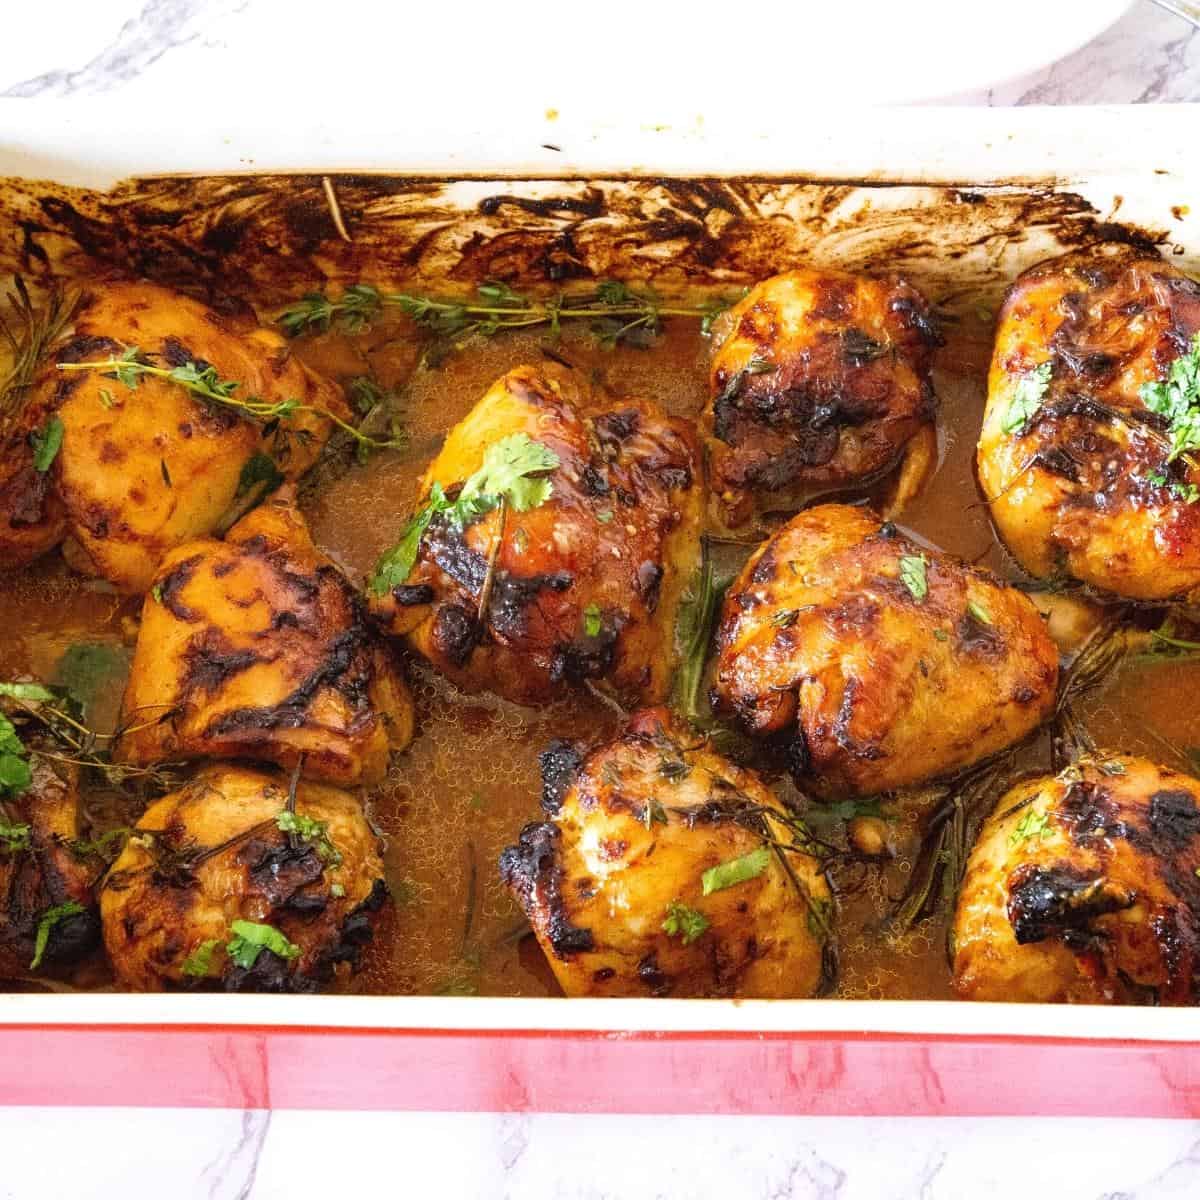 A baking dish with chicken thighs baked in juices.